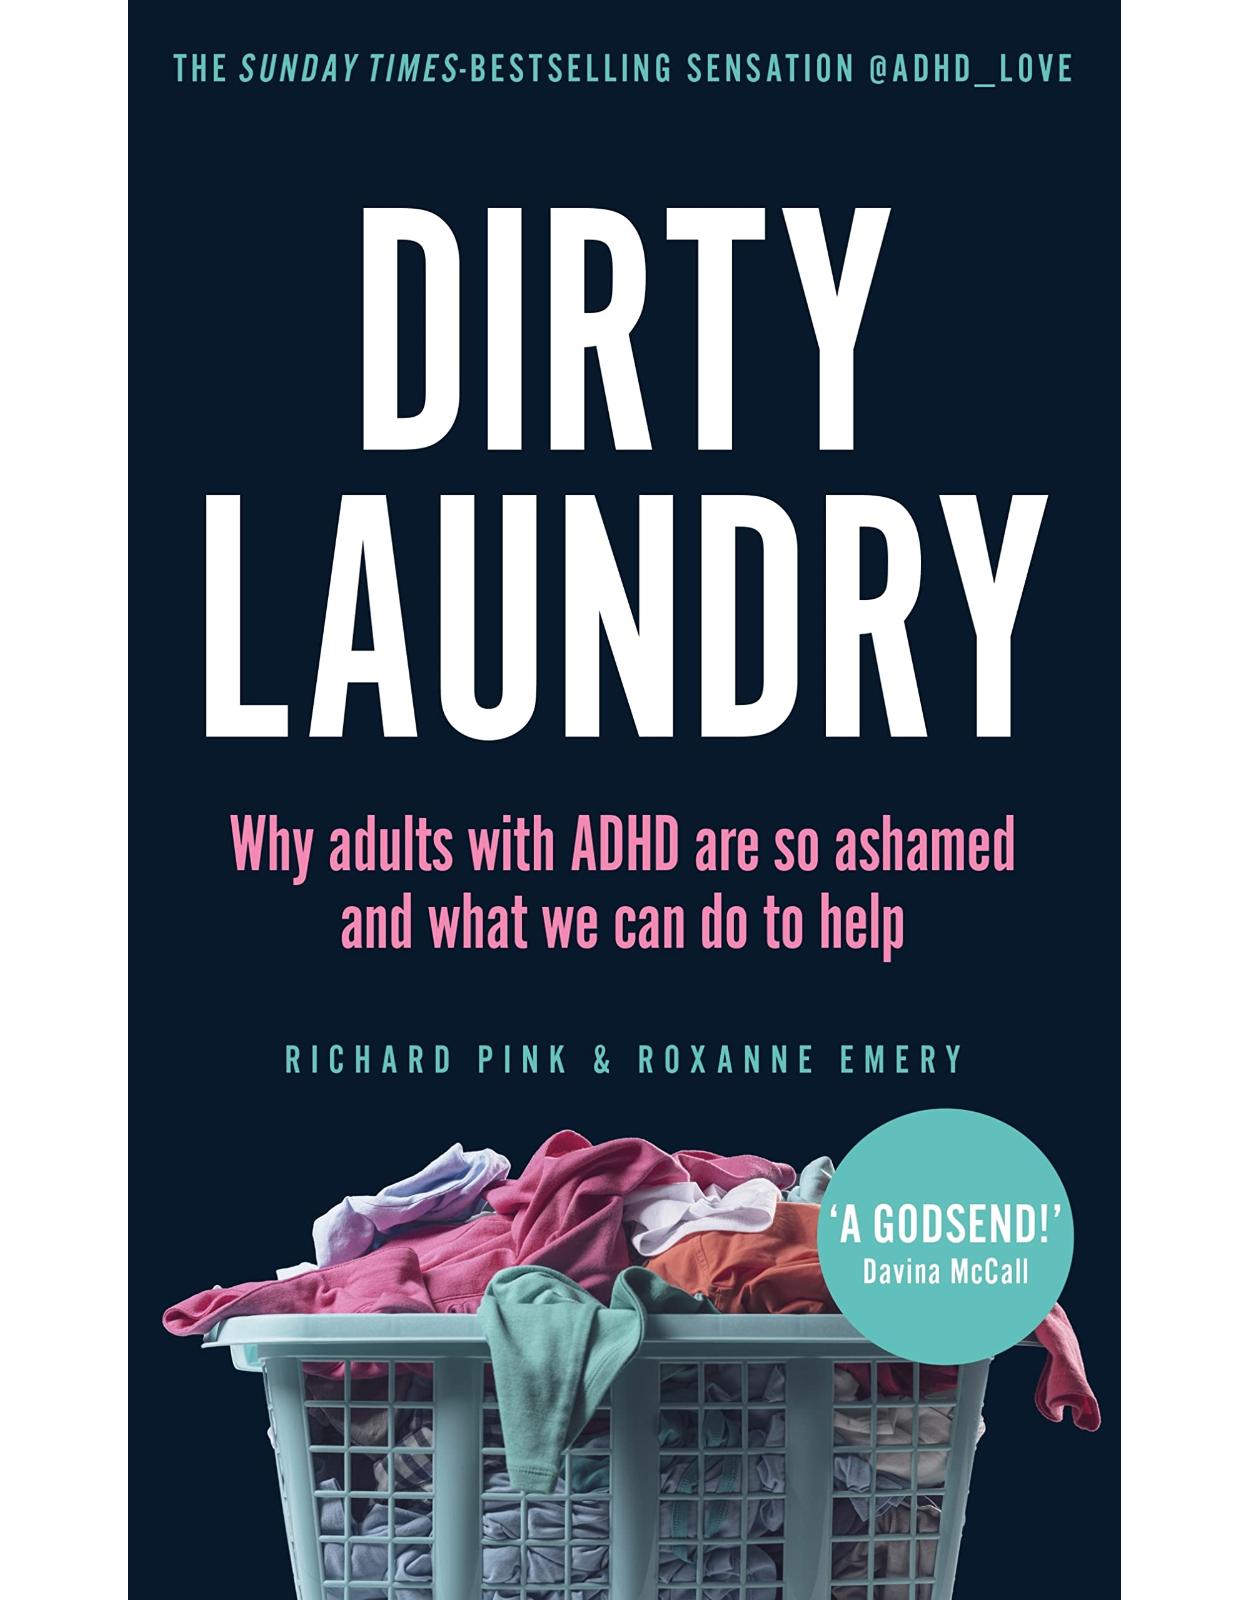 Dirty Laundry: Why adults with ADHD are so ashamed and what we can do to help